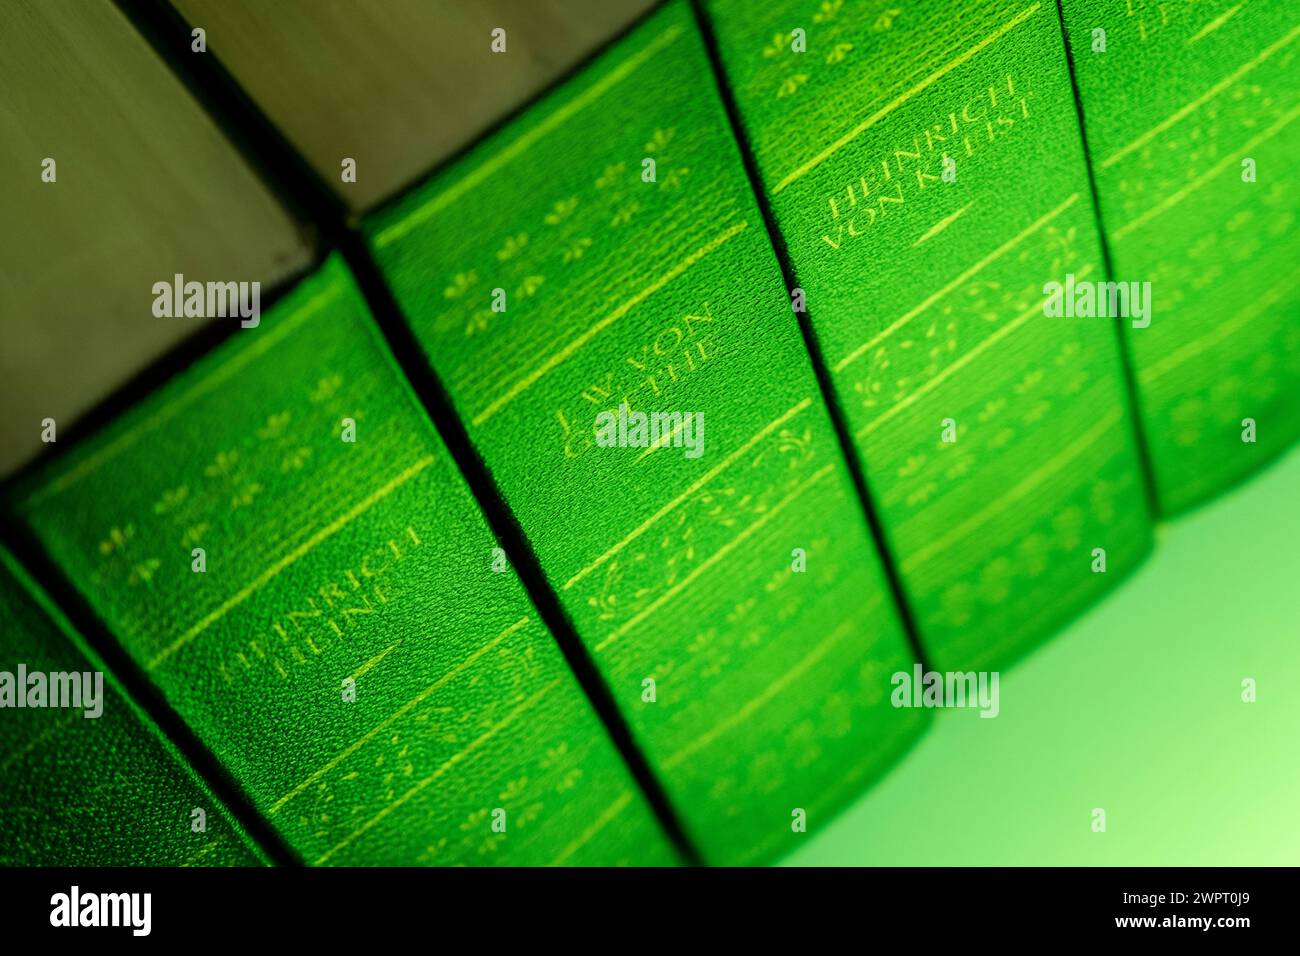 Old books with green covers or book edges are tested for the toxic arsenic. Stock Photo